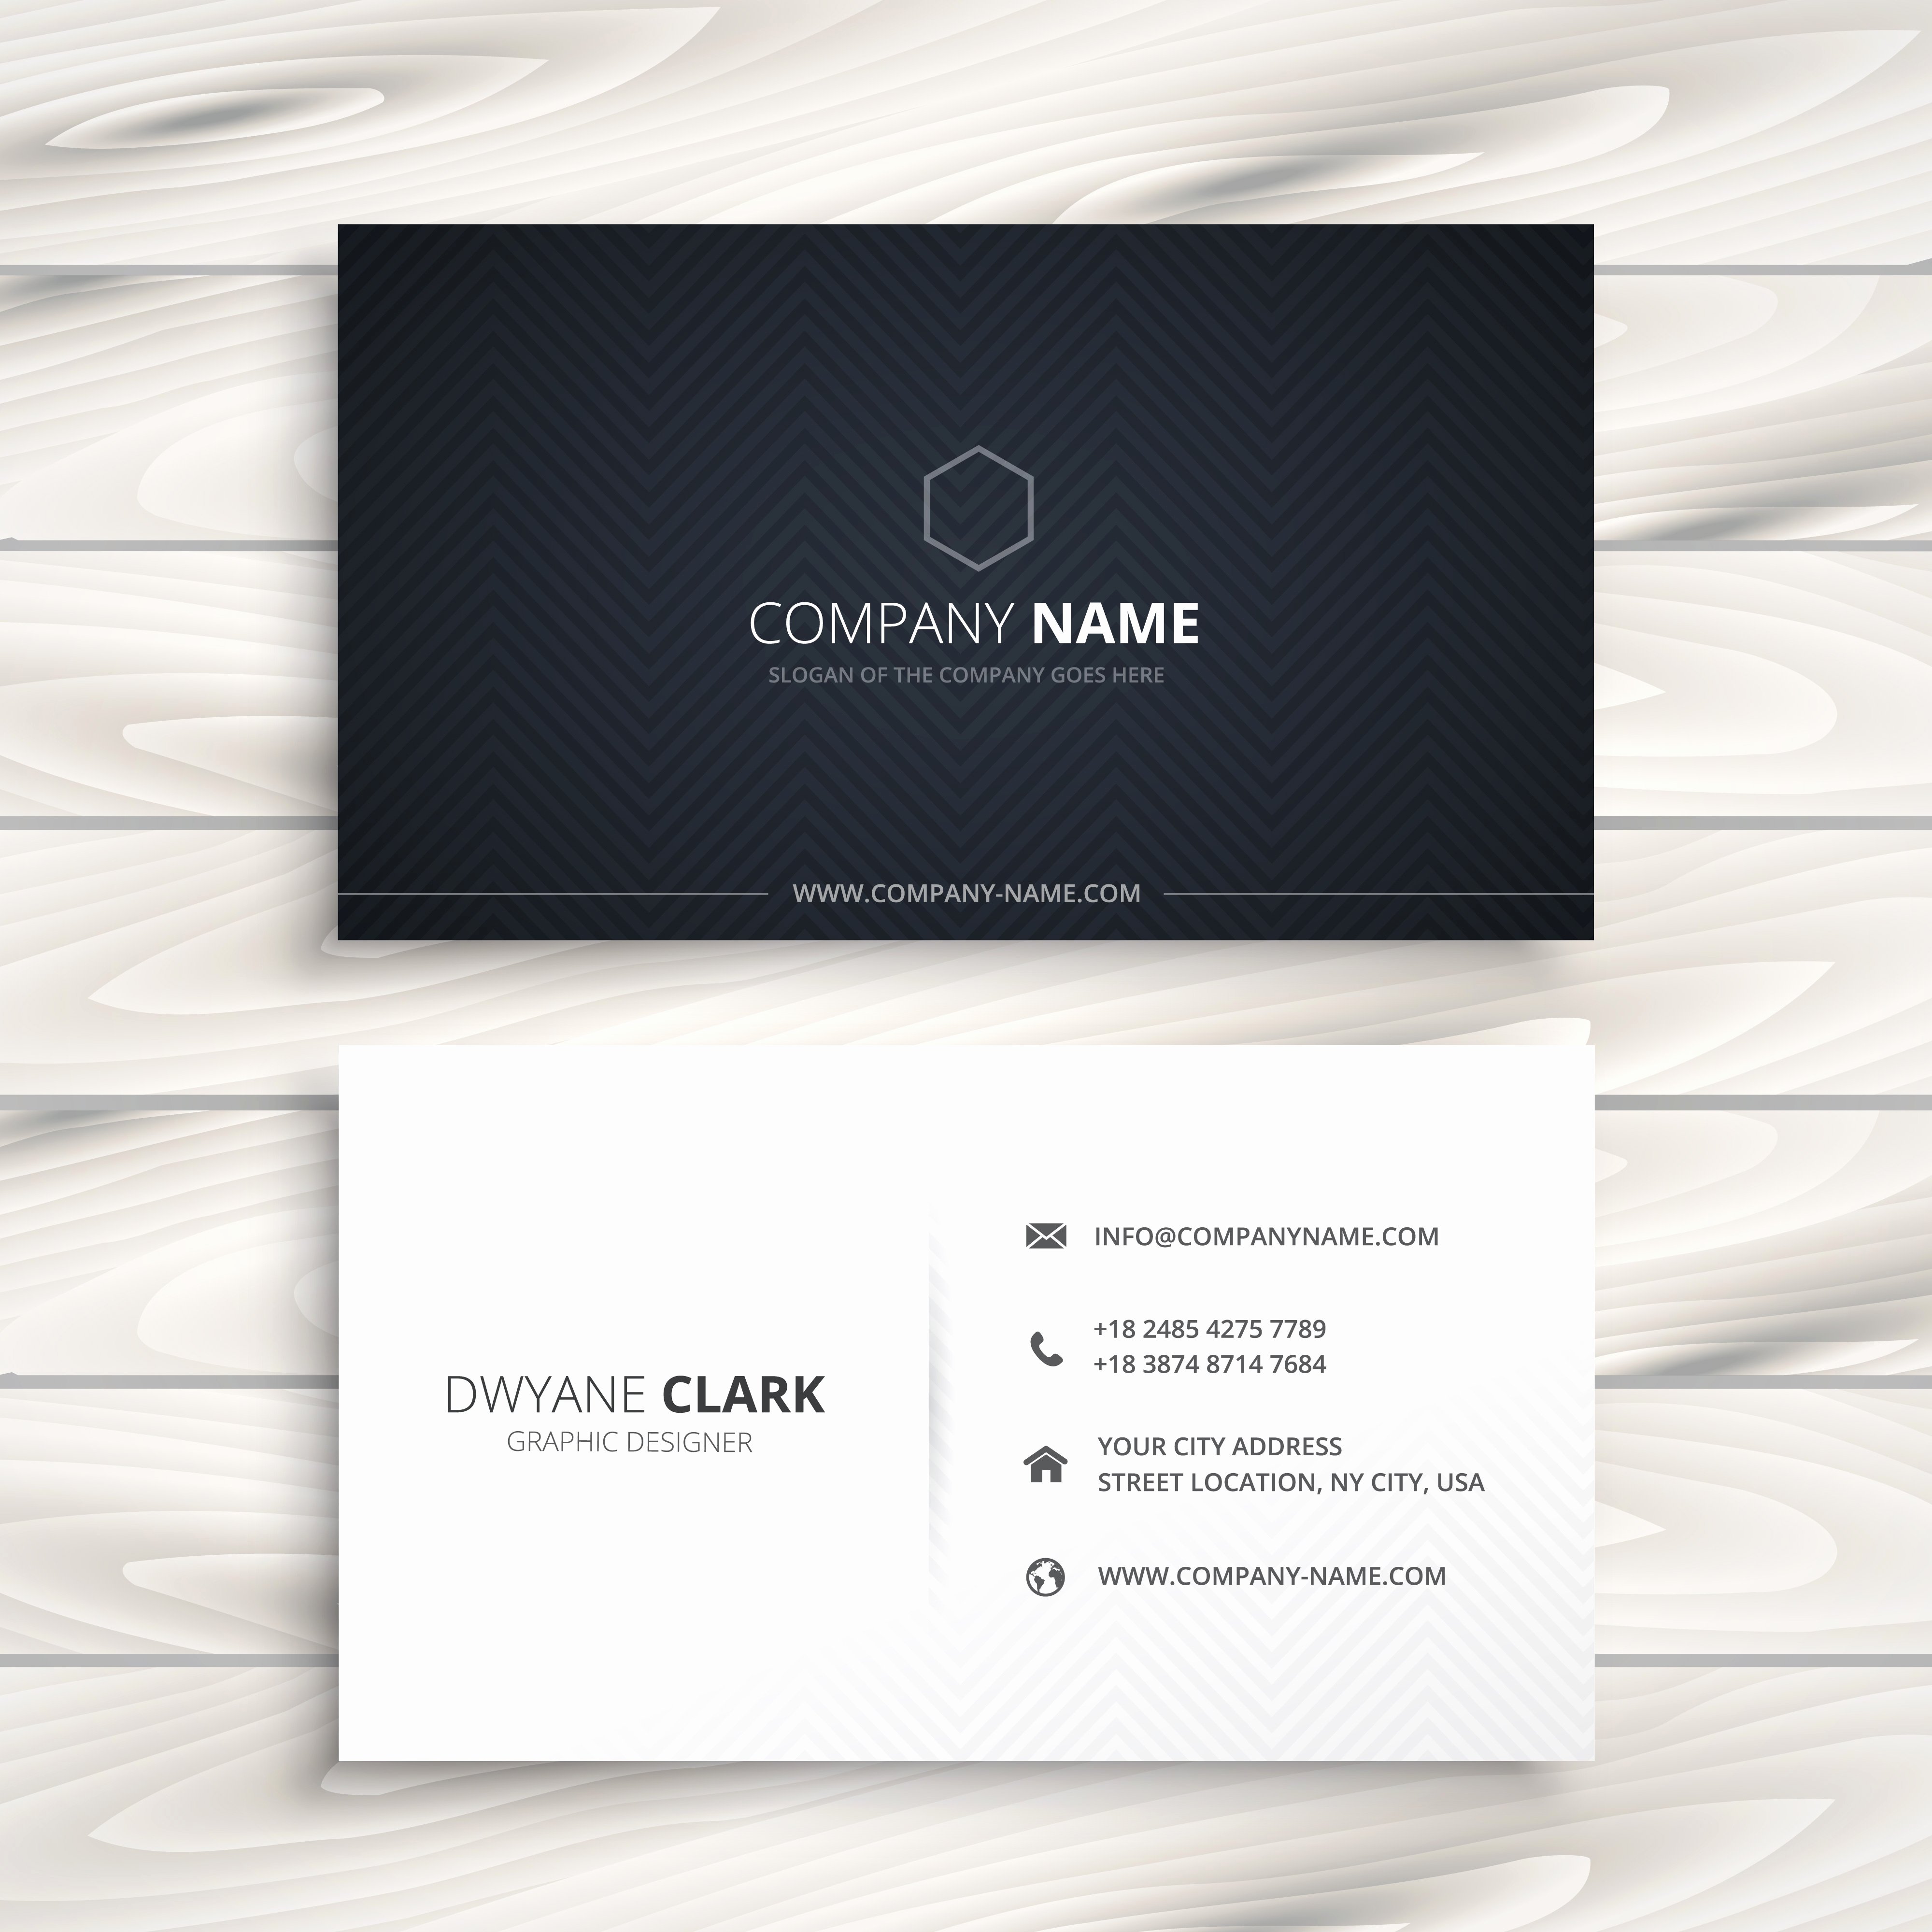 Simple Business Card Design New Simple Business Card In Black and White Style Vector